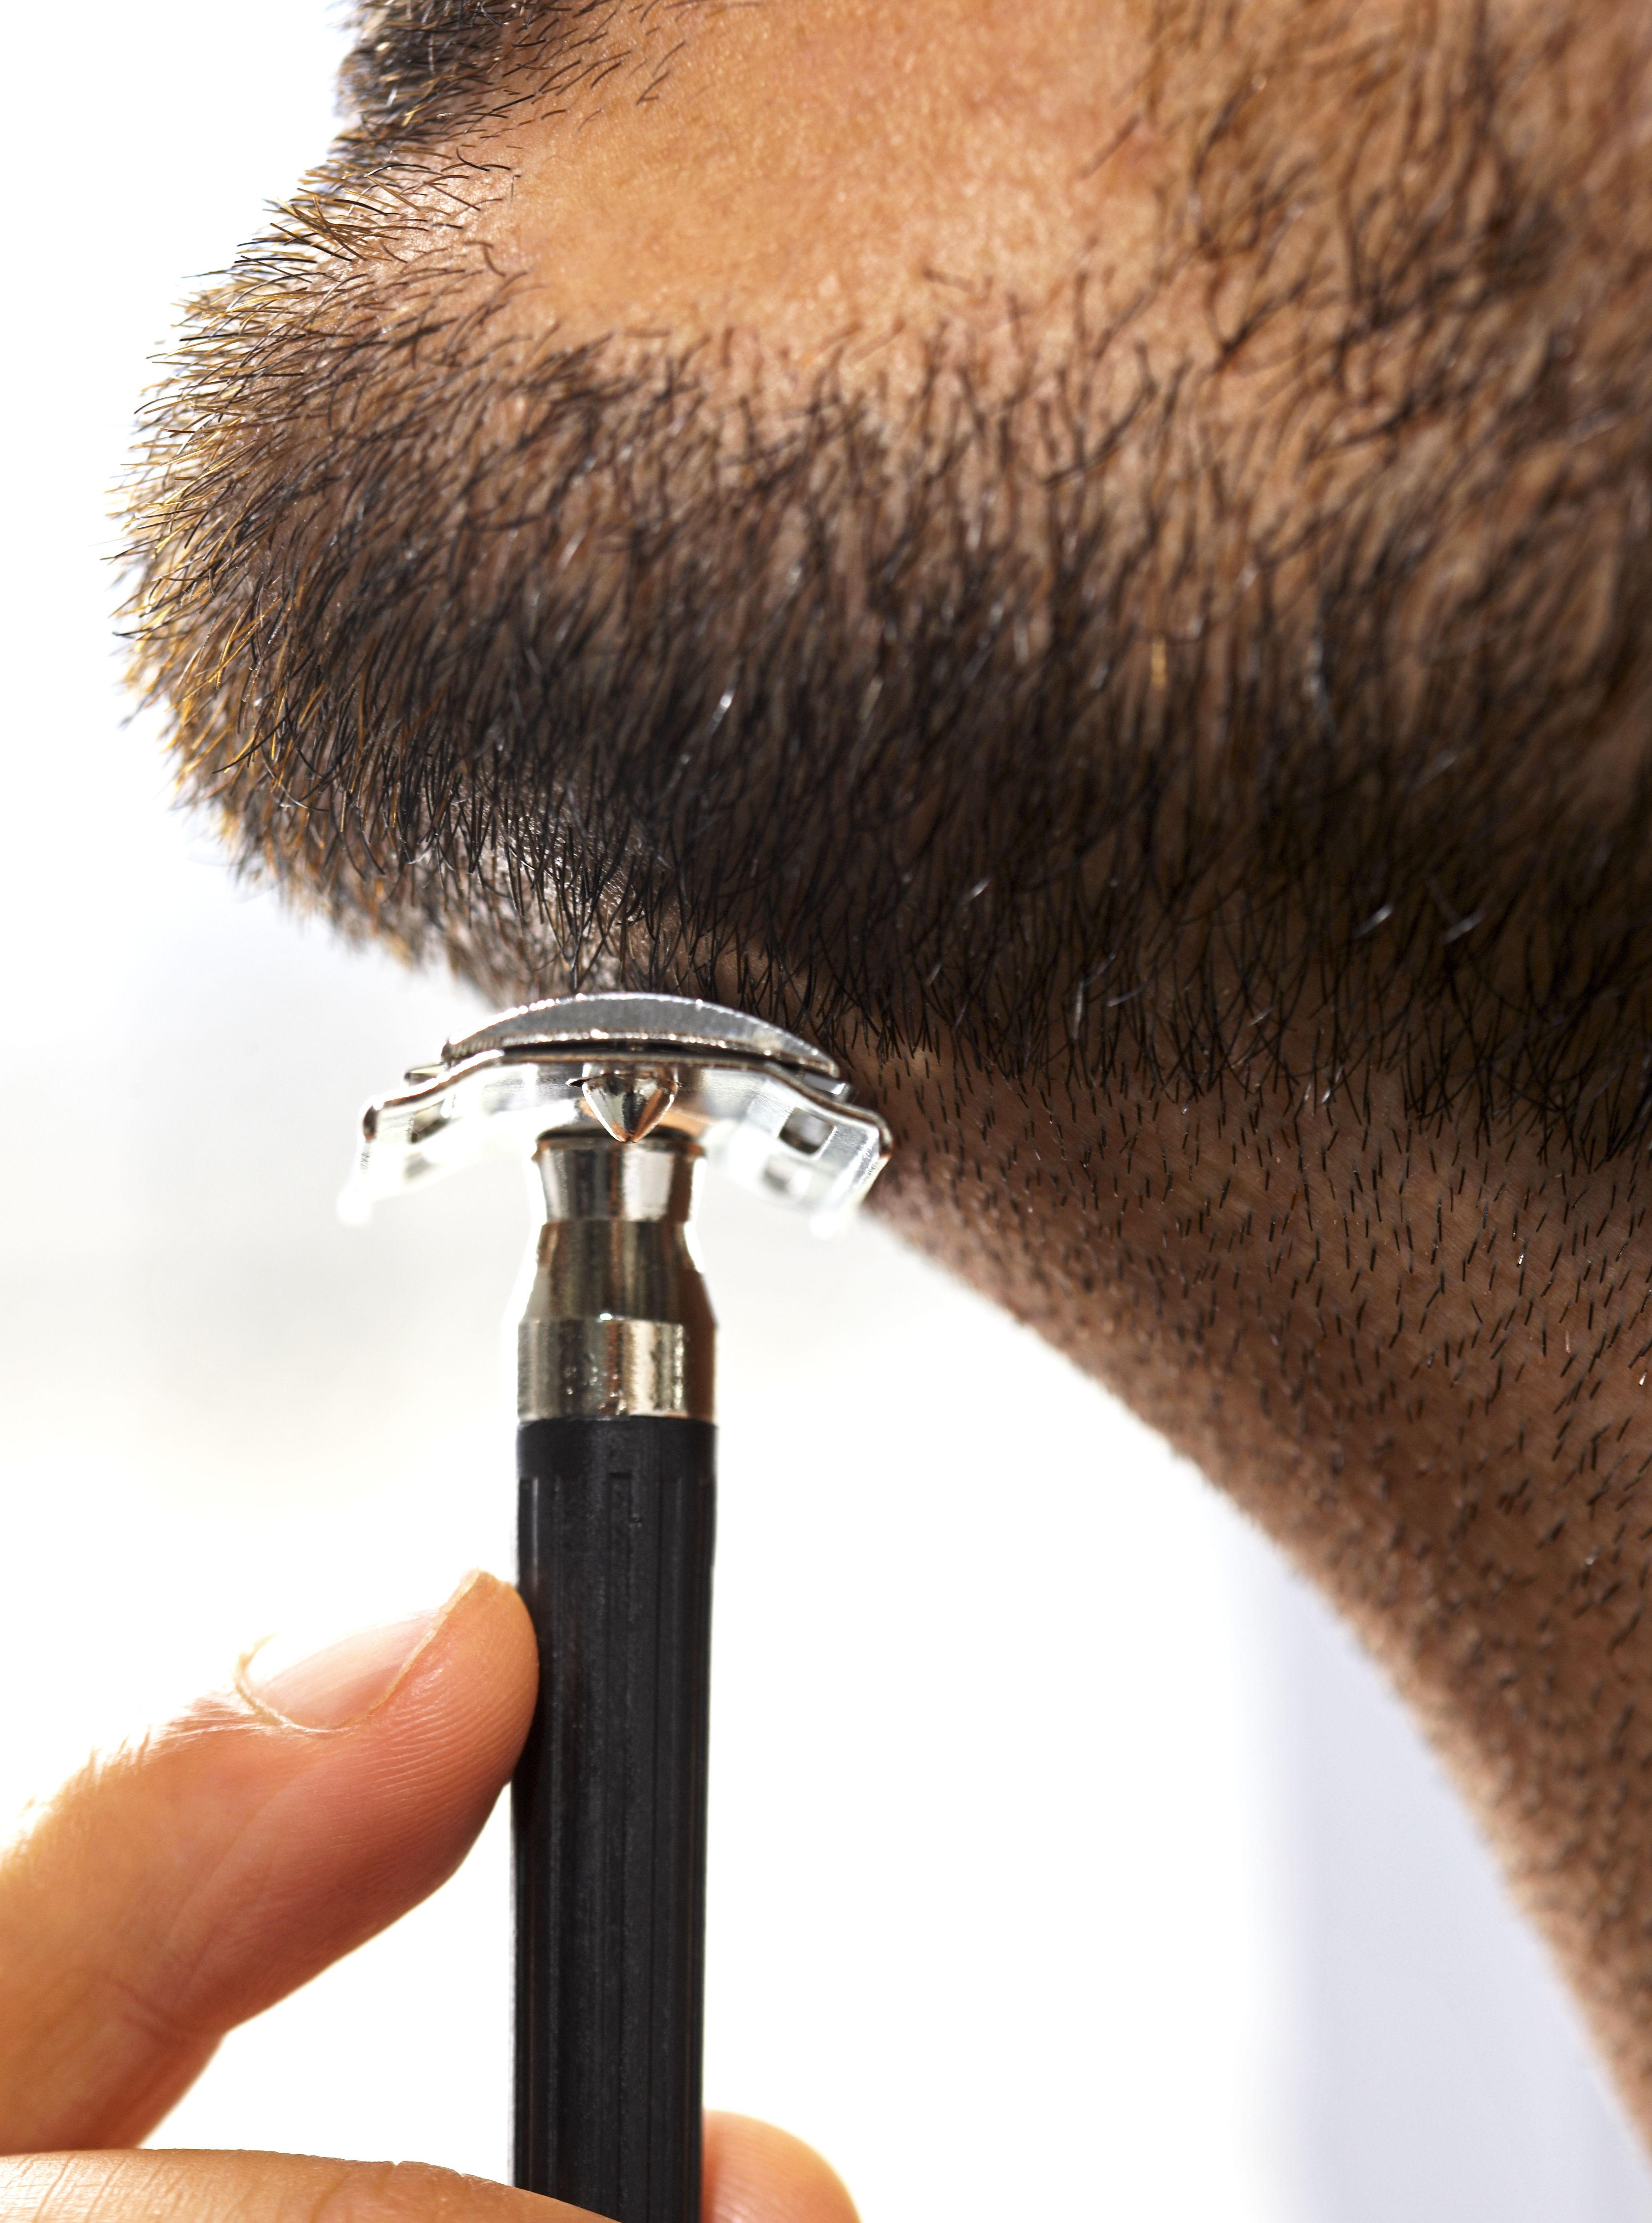 Peak Beard: Facial Hair Going Out of Style Would Be Bad for Men | Time